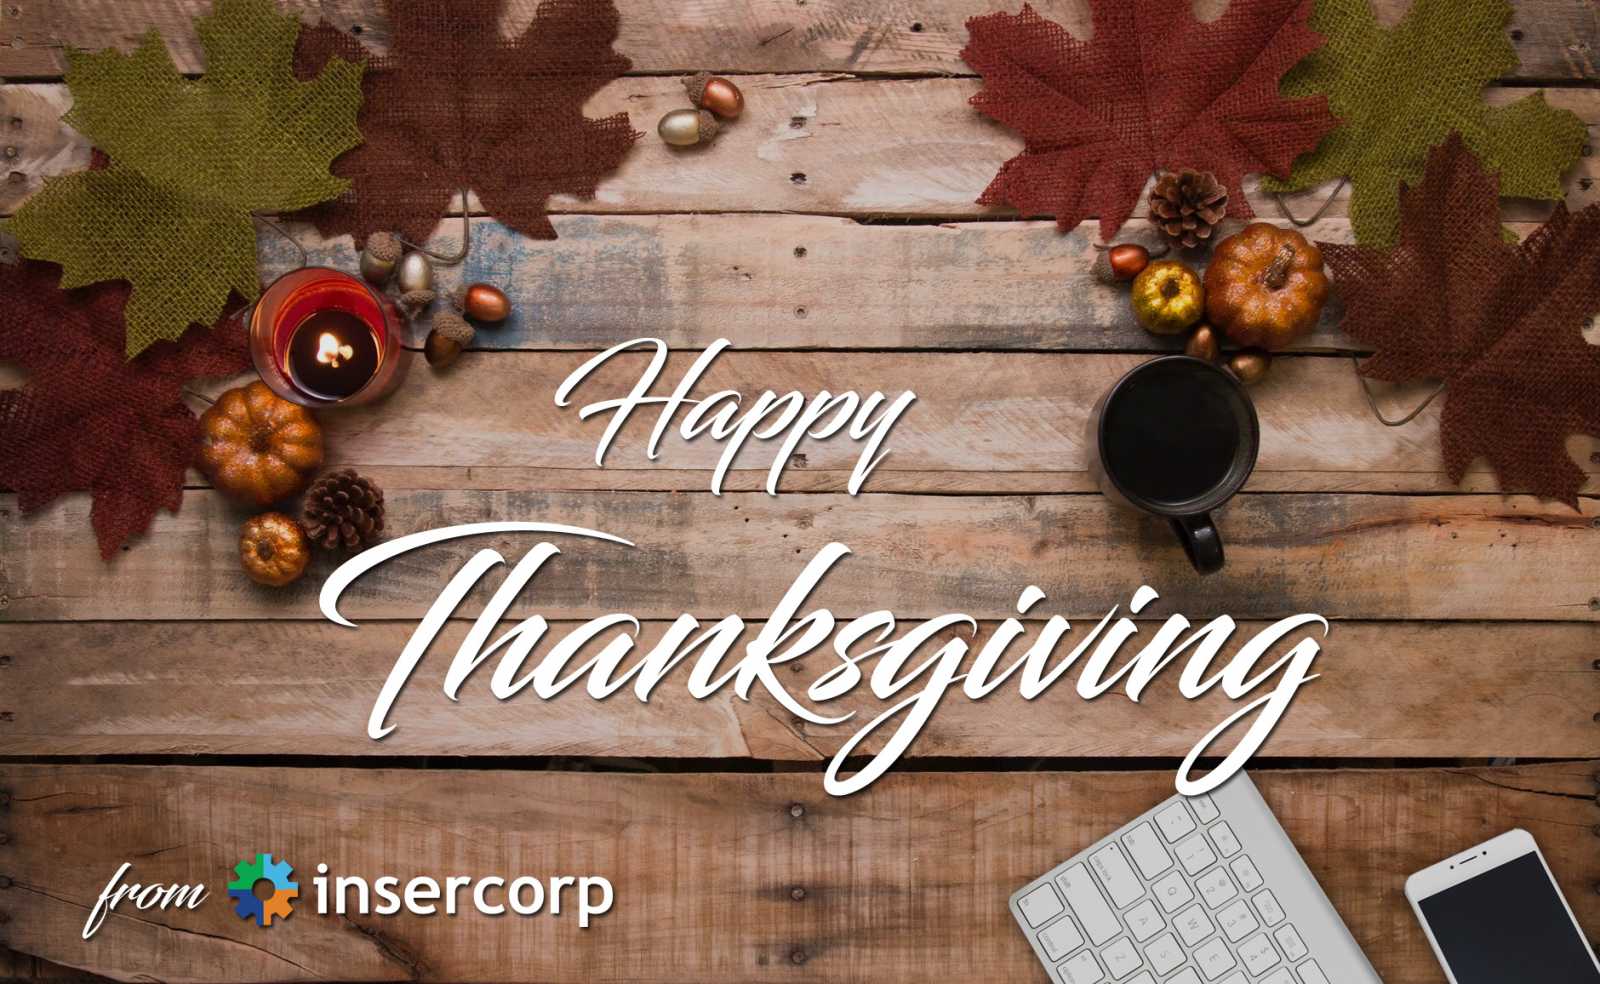 Happy Thanksgiving from Insercorp!